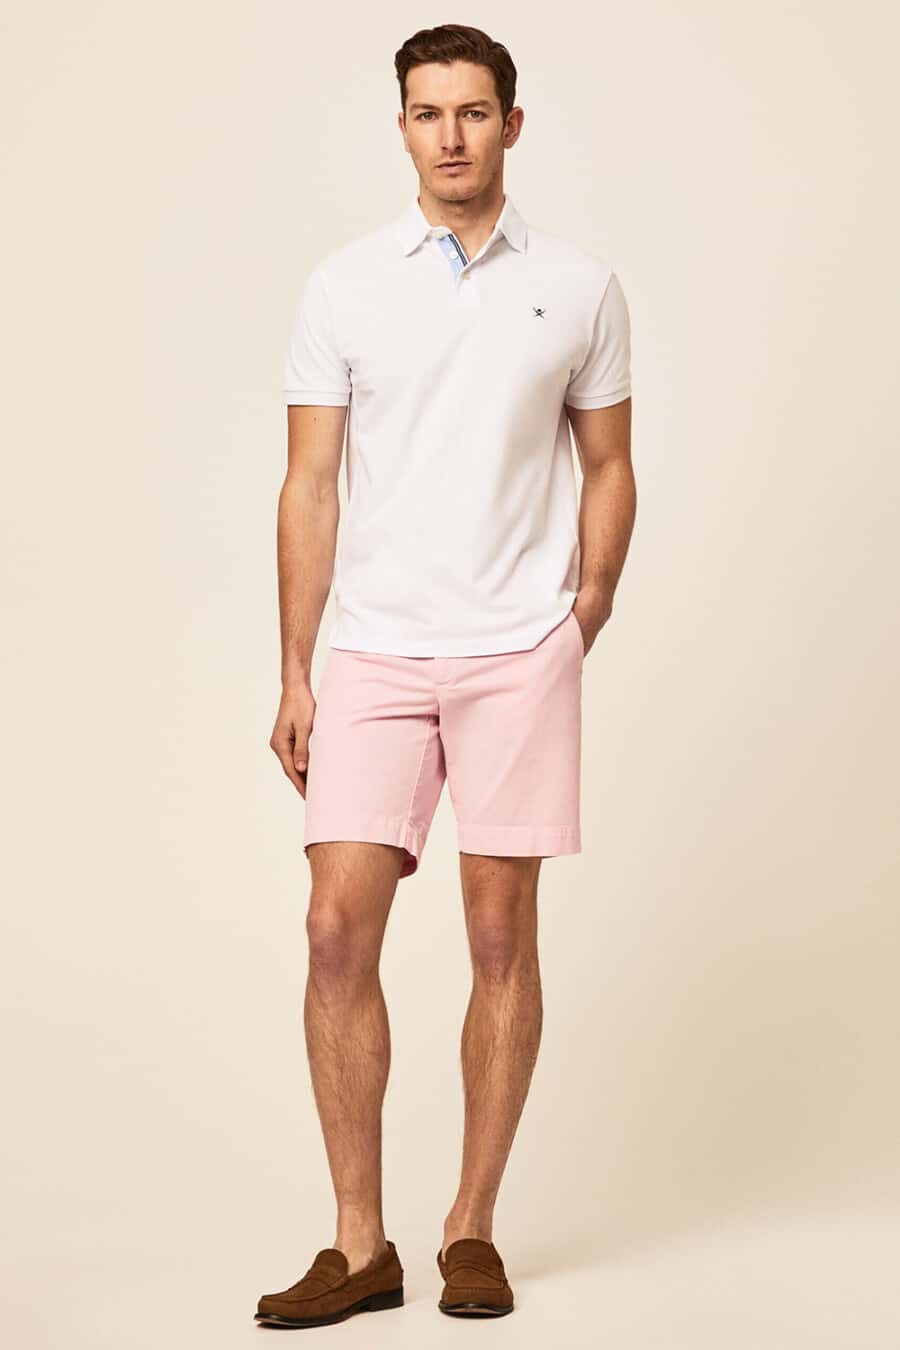 Men's pale pink shorts, white polo shirt and brown suede penny loafers outfit